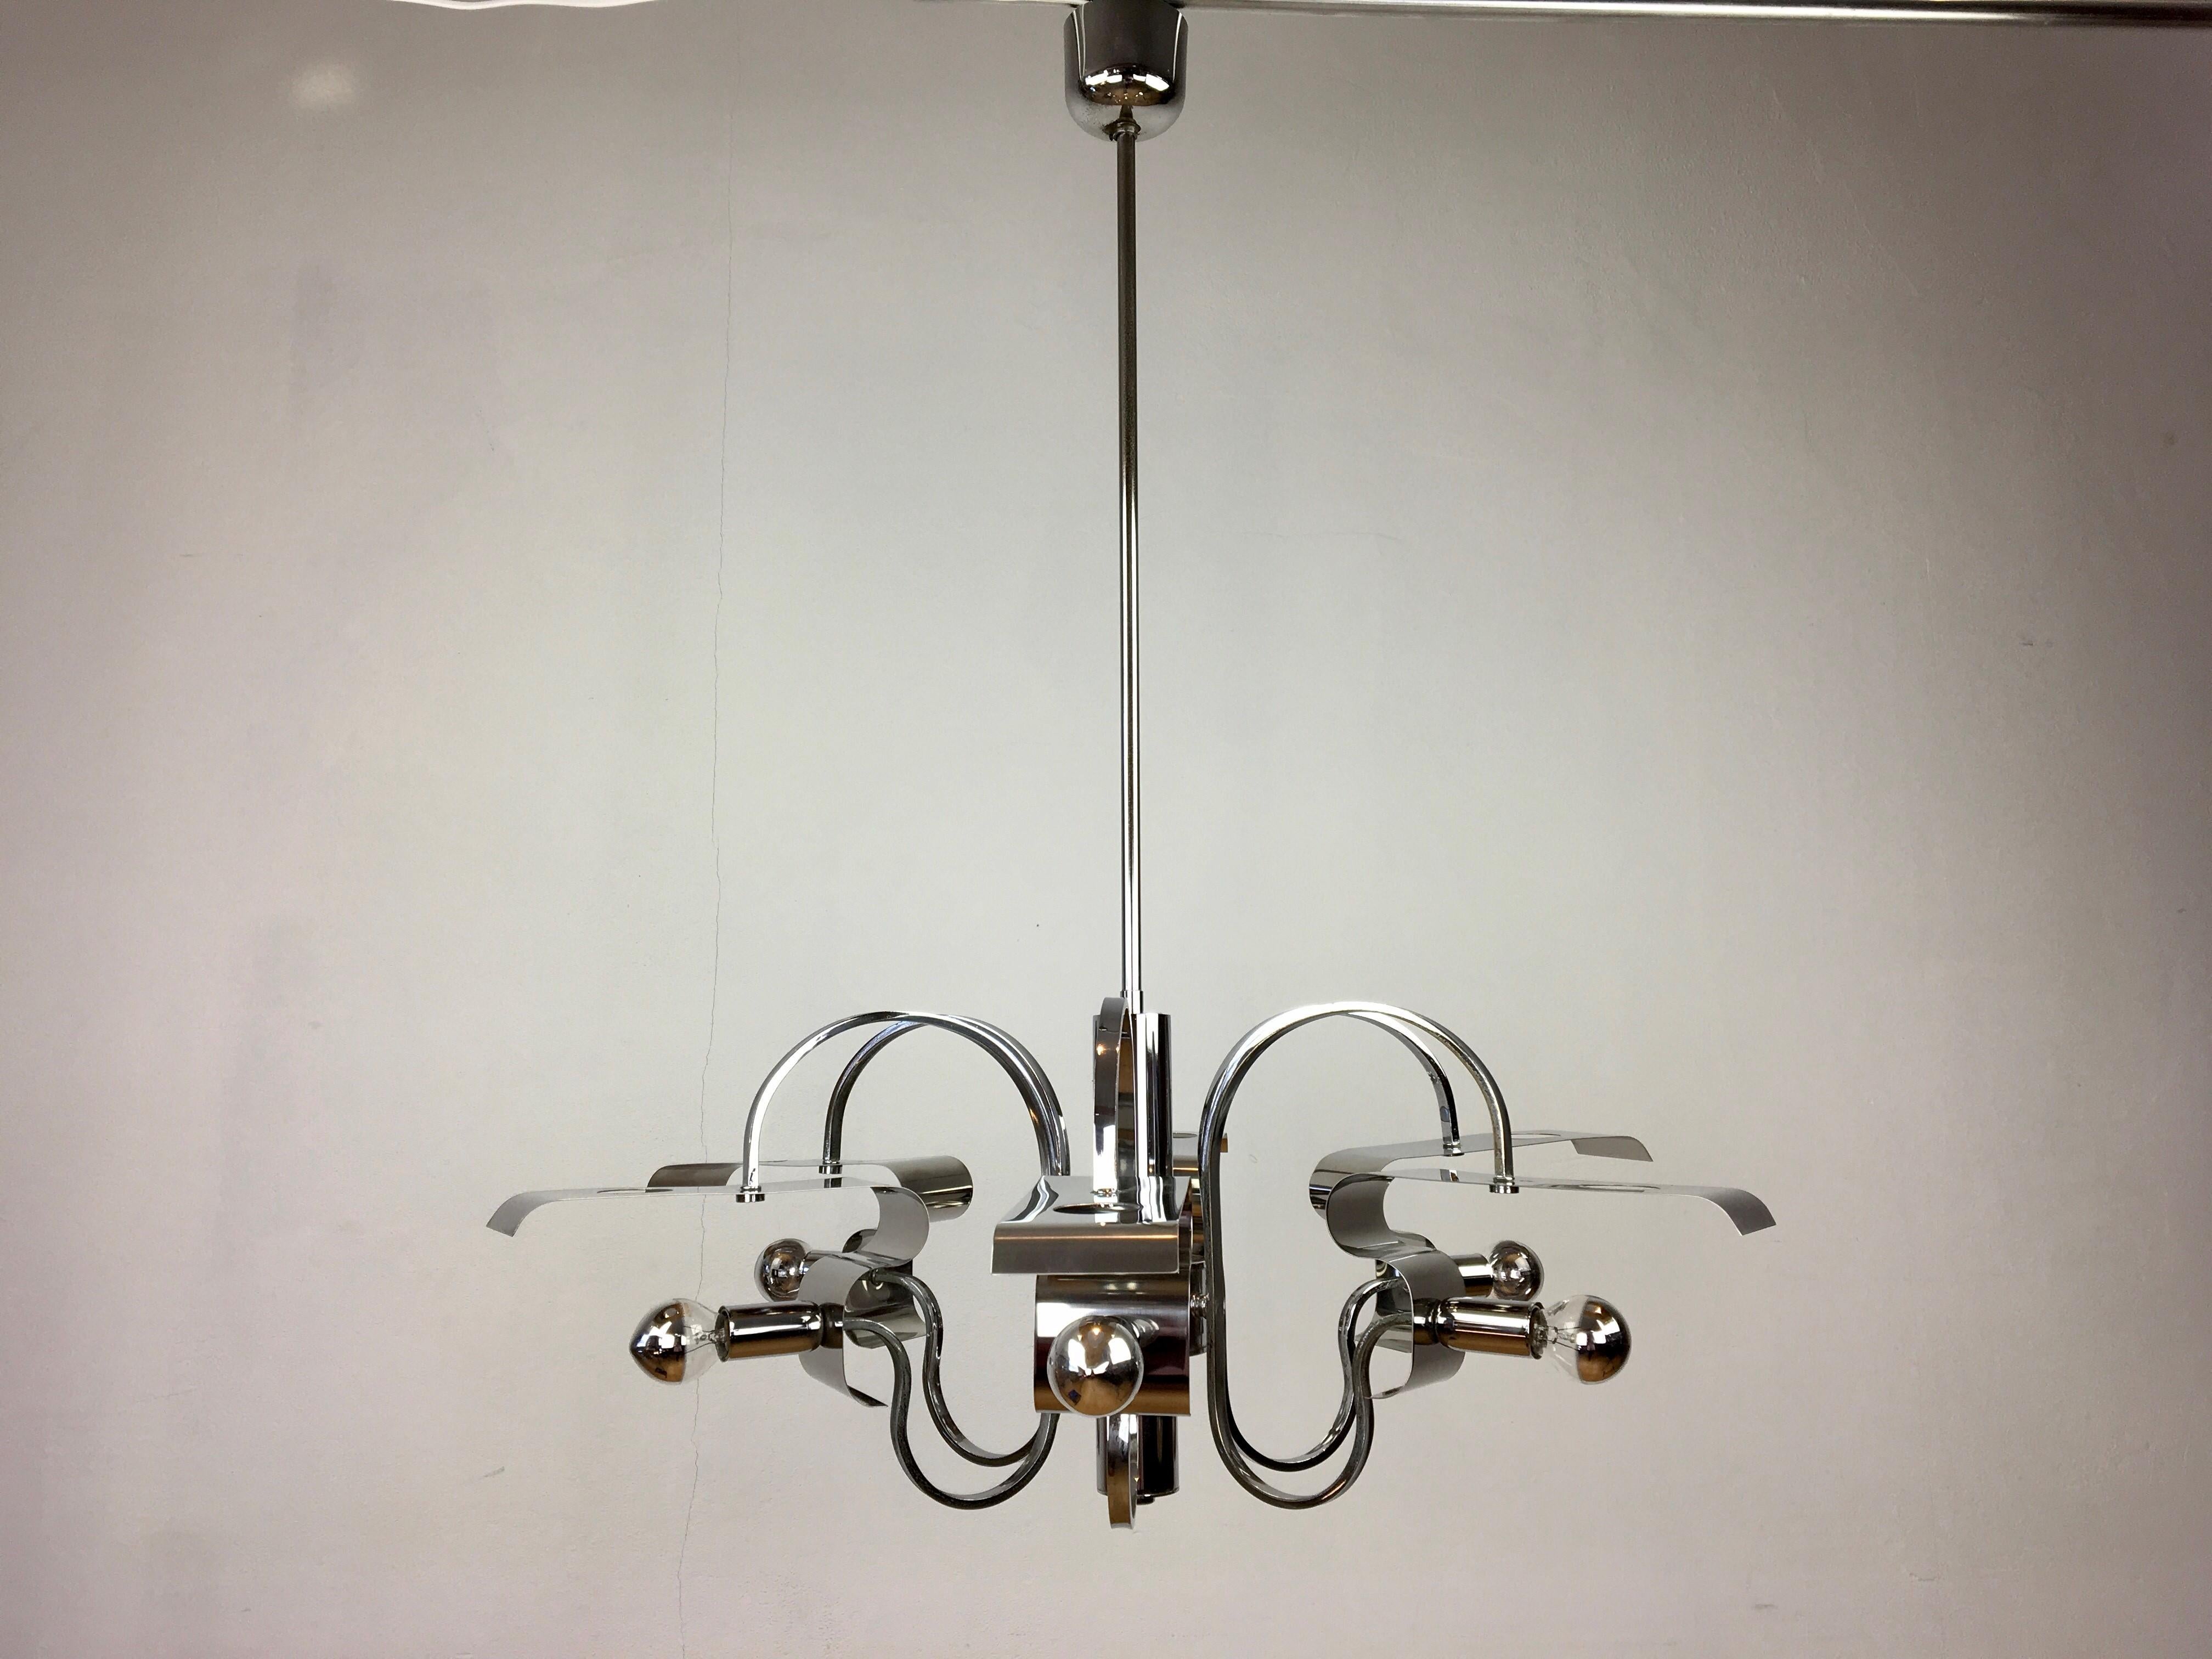 Space age chrome chandelier. 
A chromed metal chandelier with beautiful shapes / design. 
Curlings, rectangular, holes to leave the light through.
A 6 - armed chandelier with 6 light points with E14 fittings.
With this type of lamp it's